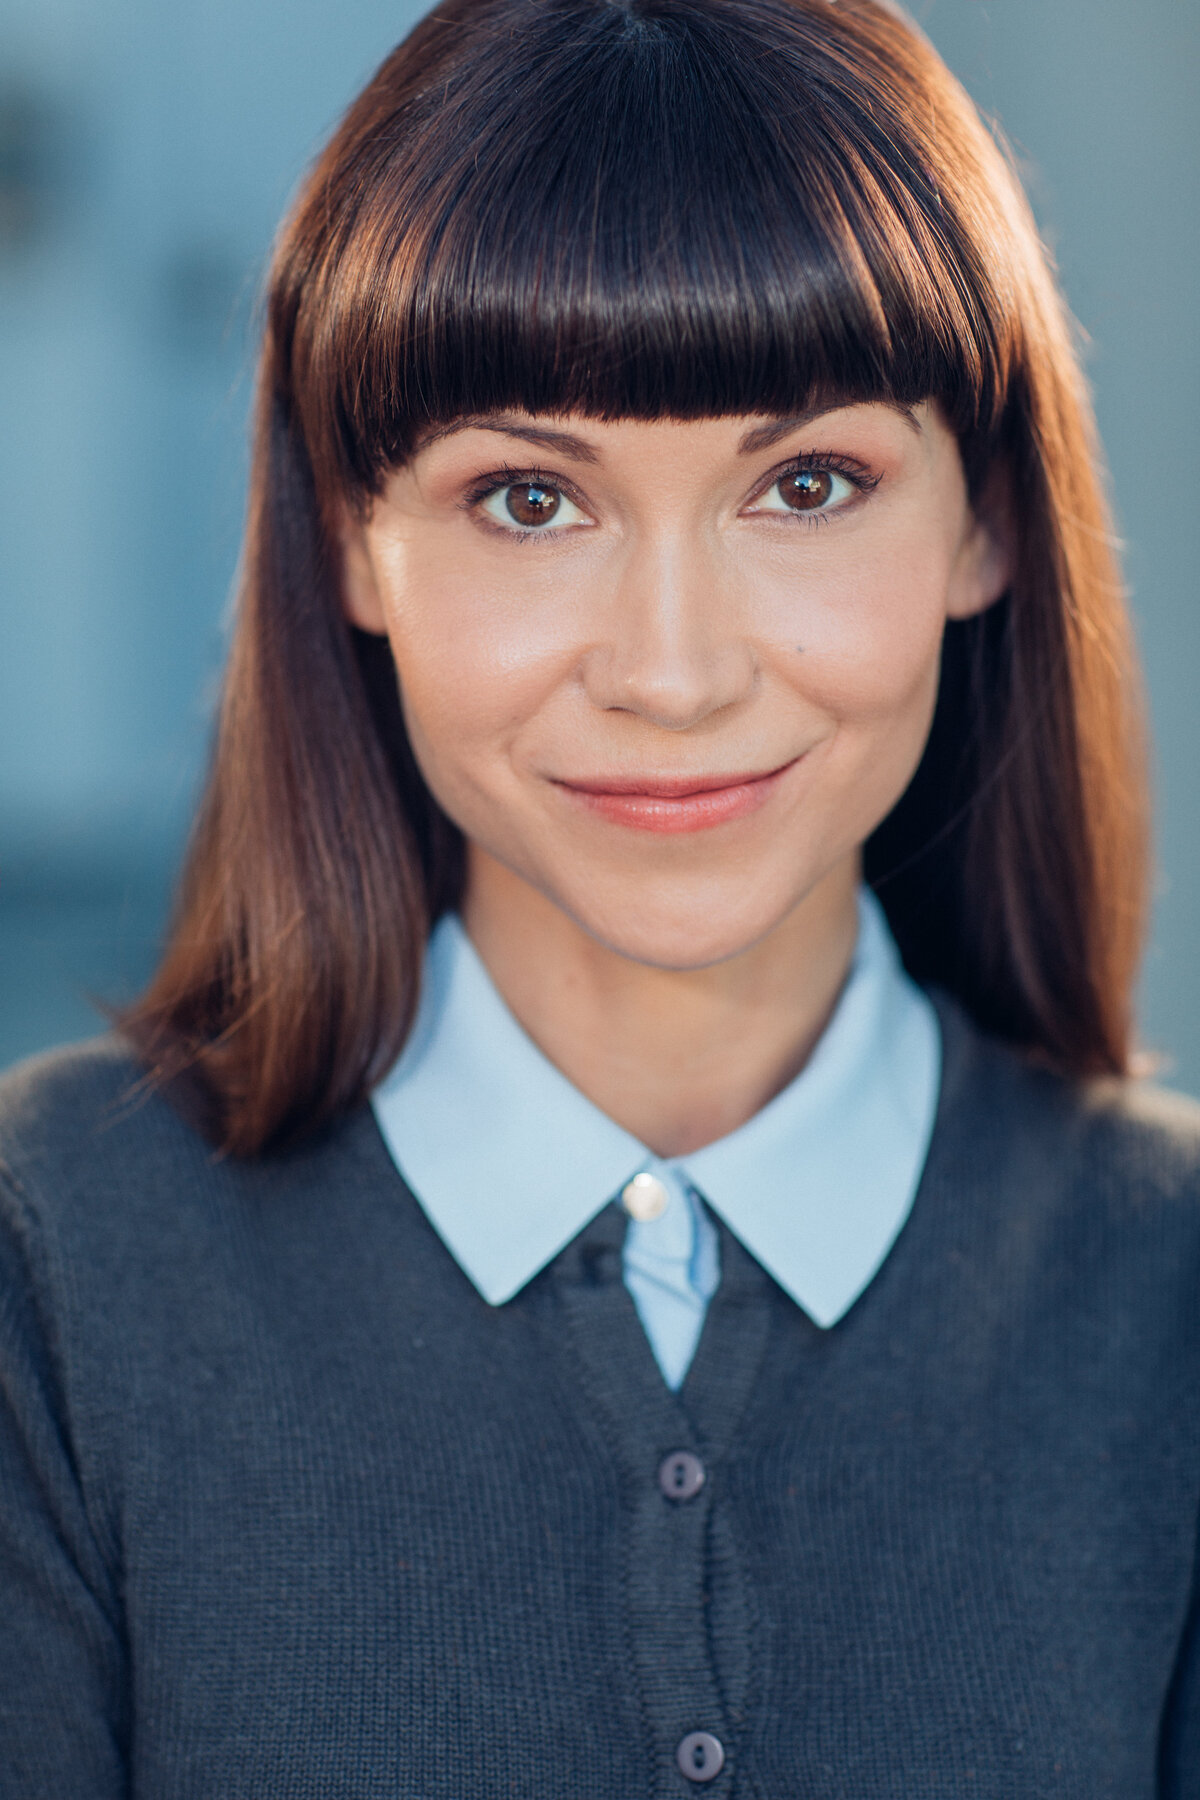 Headshot Photograph Of Young Woman In Blue Buttoned Shirt Los Angeles